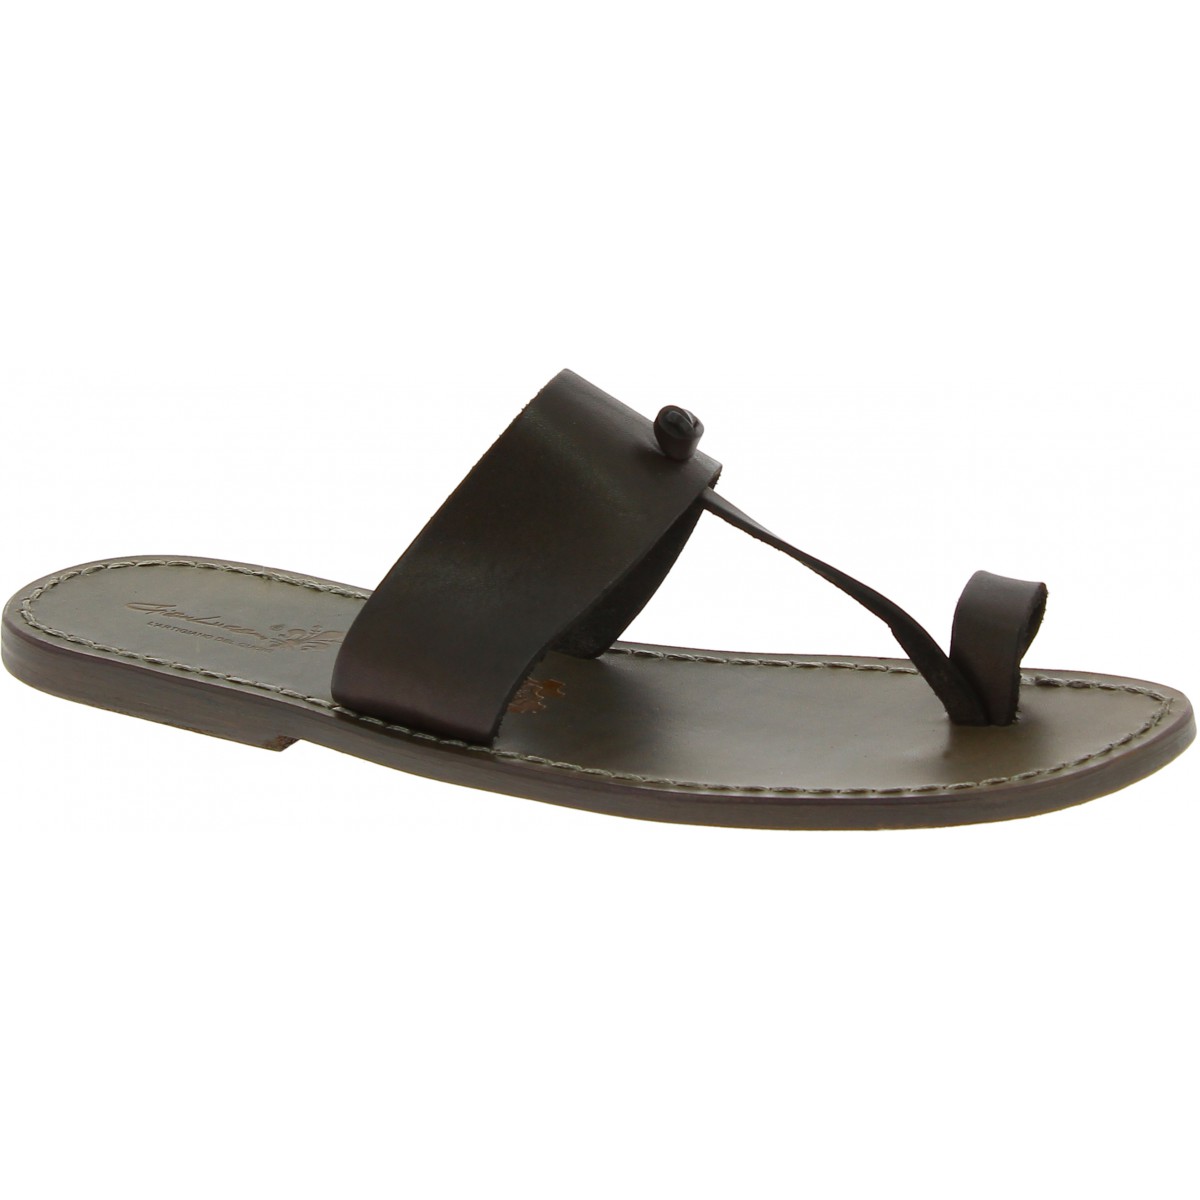 Mud color leather thong sandals Handmade in Italy | The leather craftsmen